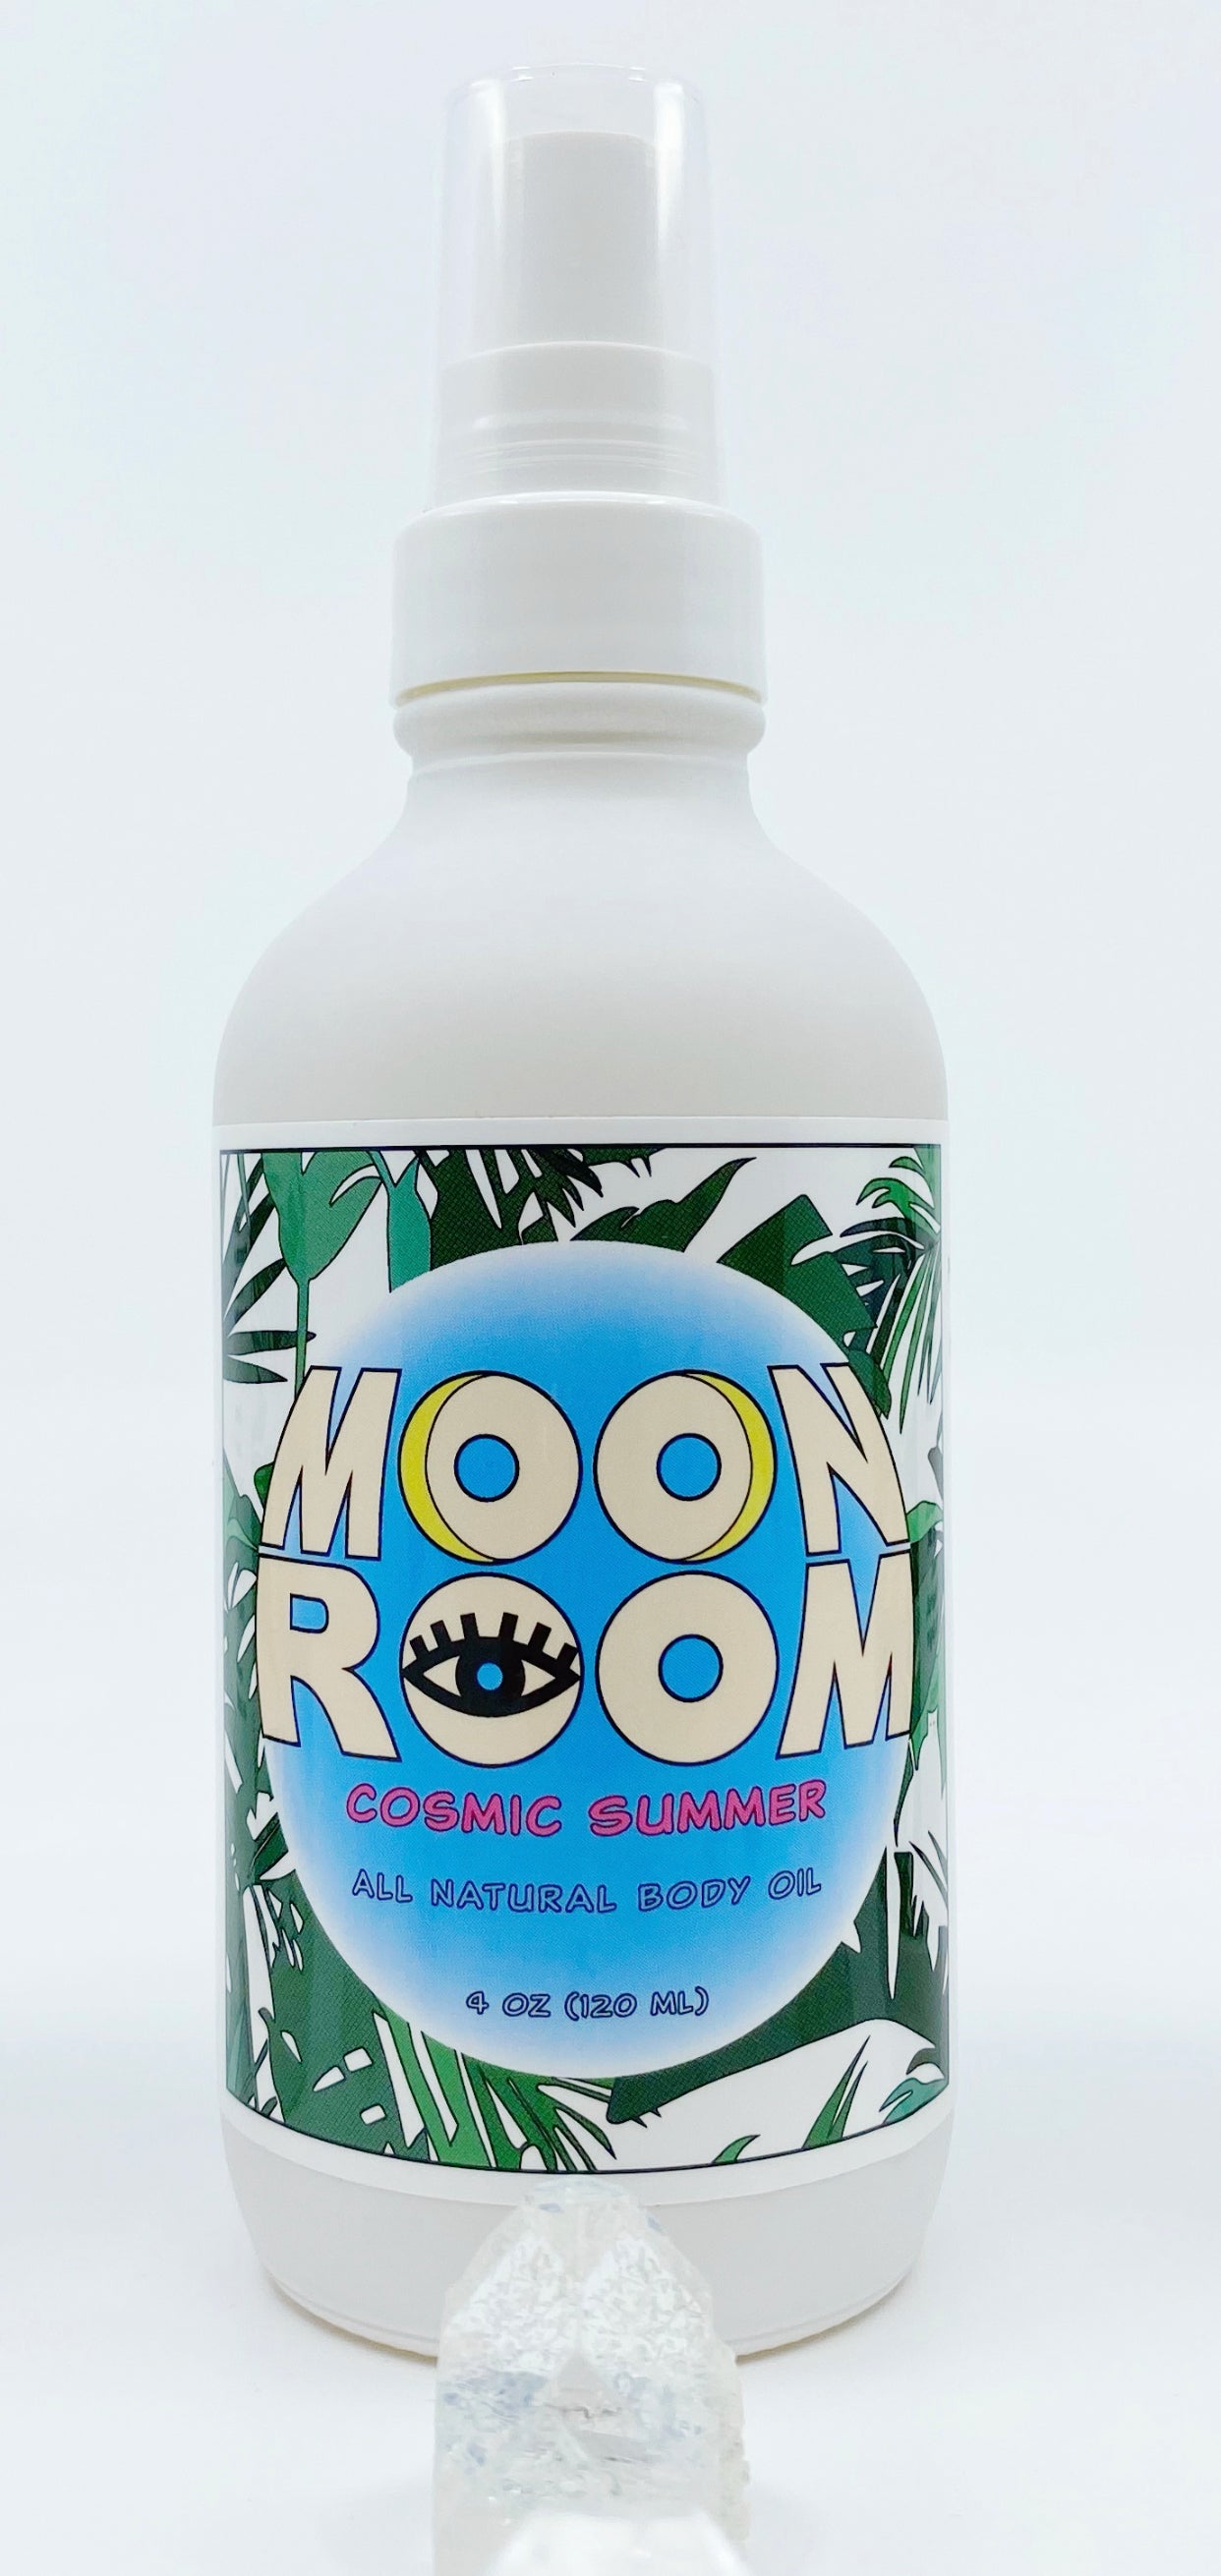 Moon Room Cosmic Summer All Natural Body Oil 2oz. - Moon Room Shop and Wellness